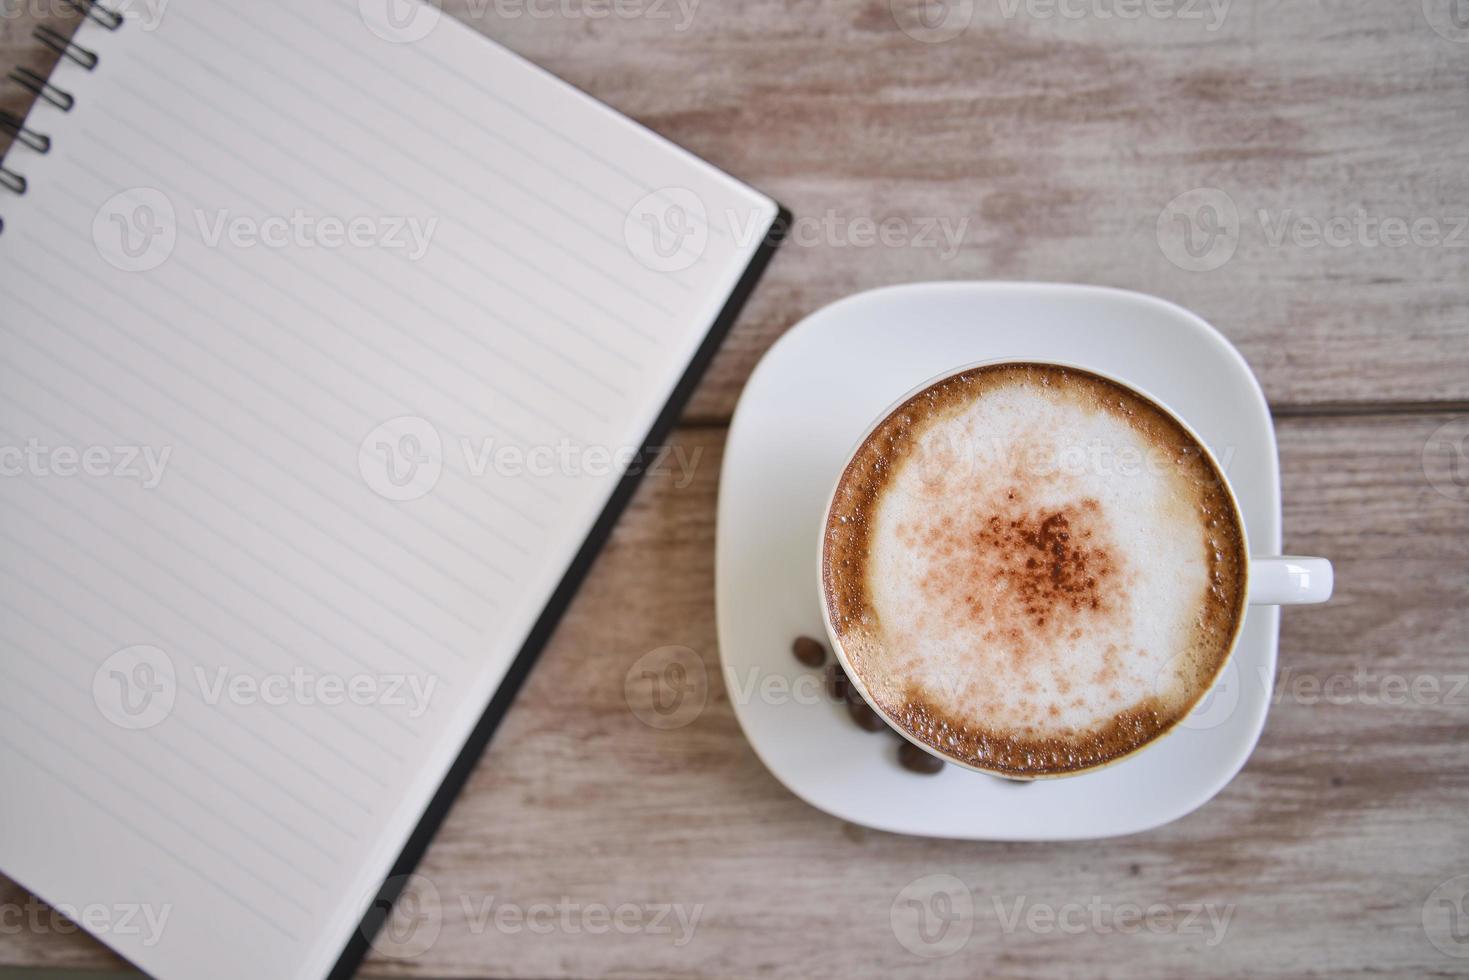 Open a blank white notebook, pen and cup of coffee on the desk photo